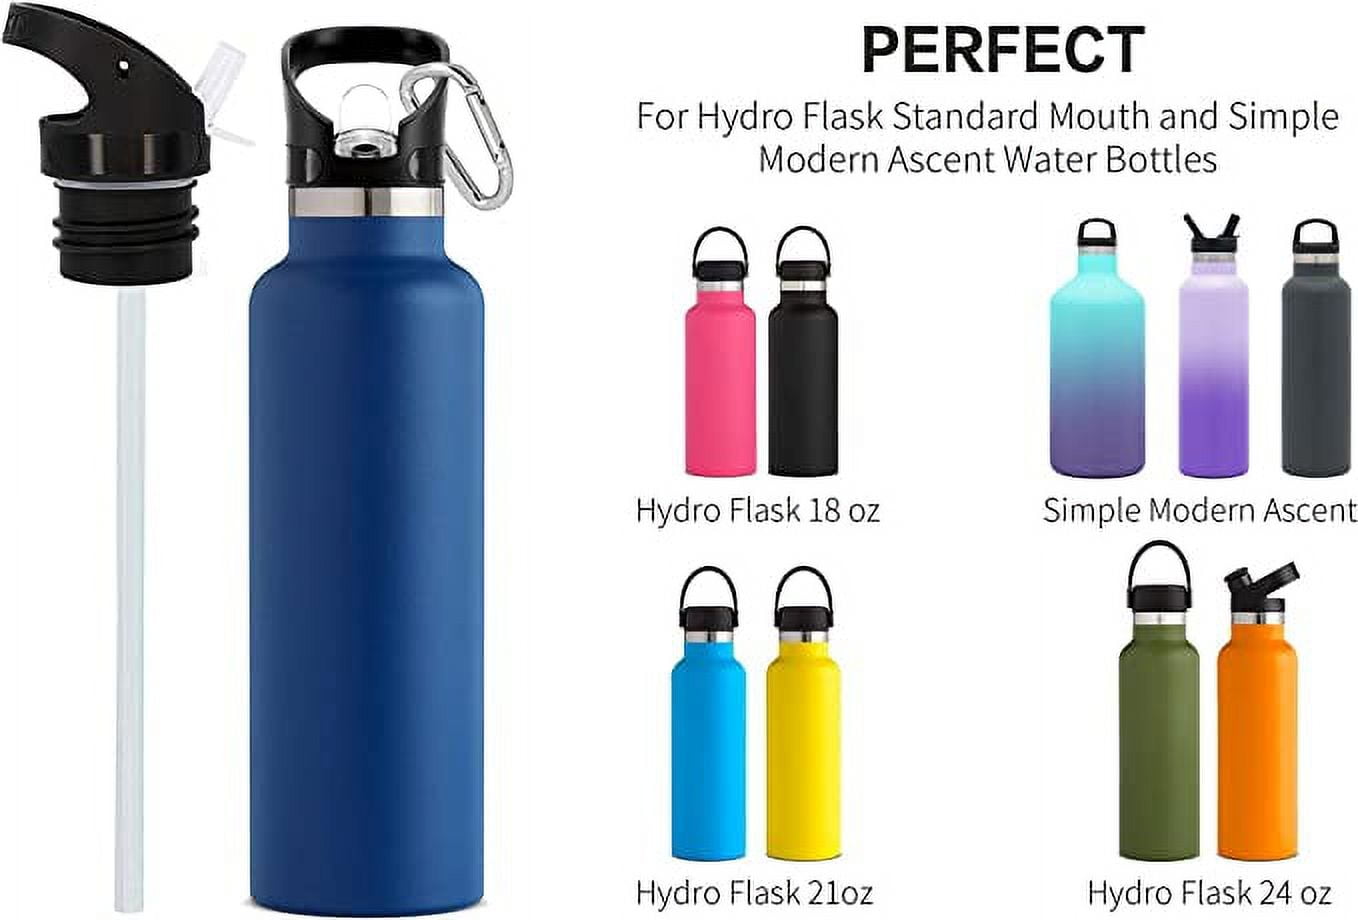 Straw Lid Replacement for Hydro Flask Standard Mouth & Simple Modern Ascent 12-64oz Bottles. New and Improved Design Sipping Cap with Straws, Brush